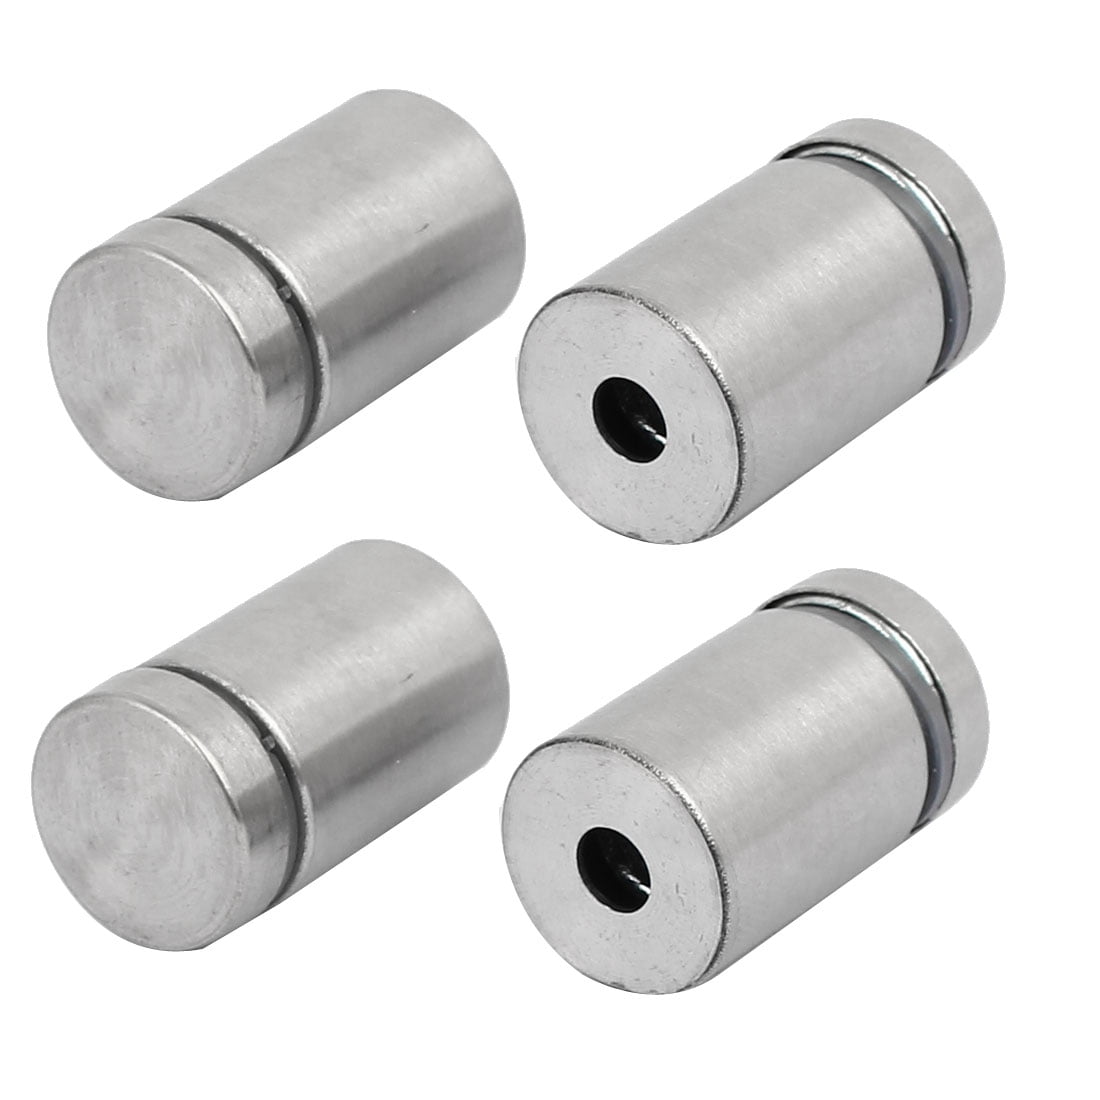 16mmx25mm Stainless Steel Glass Table Spacers Standoff Fixing Screws Bolts 4pcs Walmart Canada